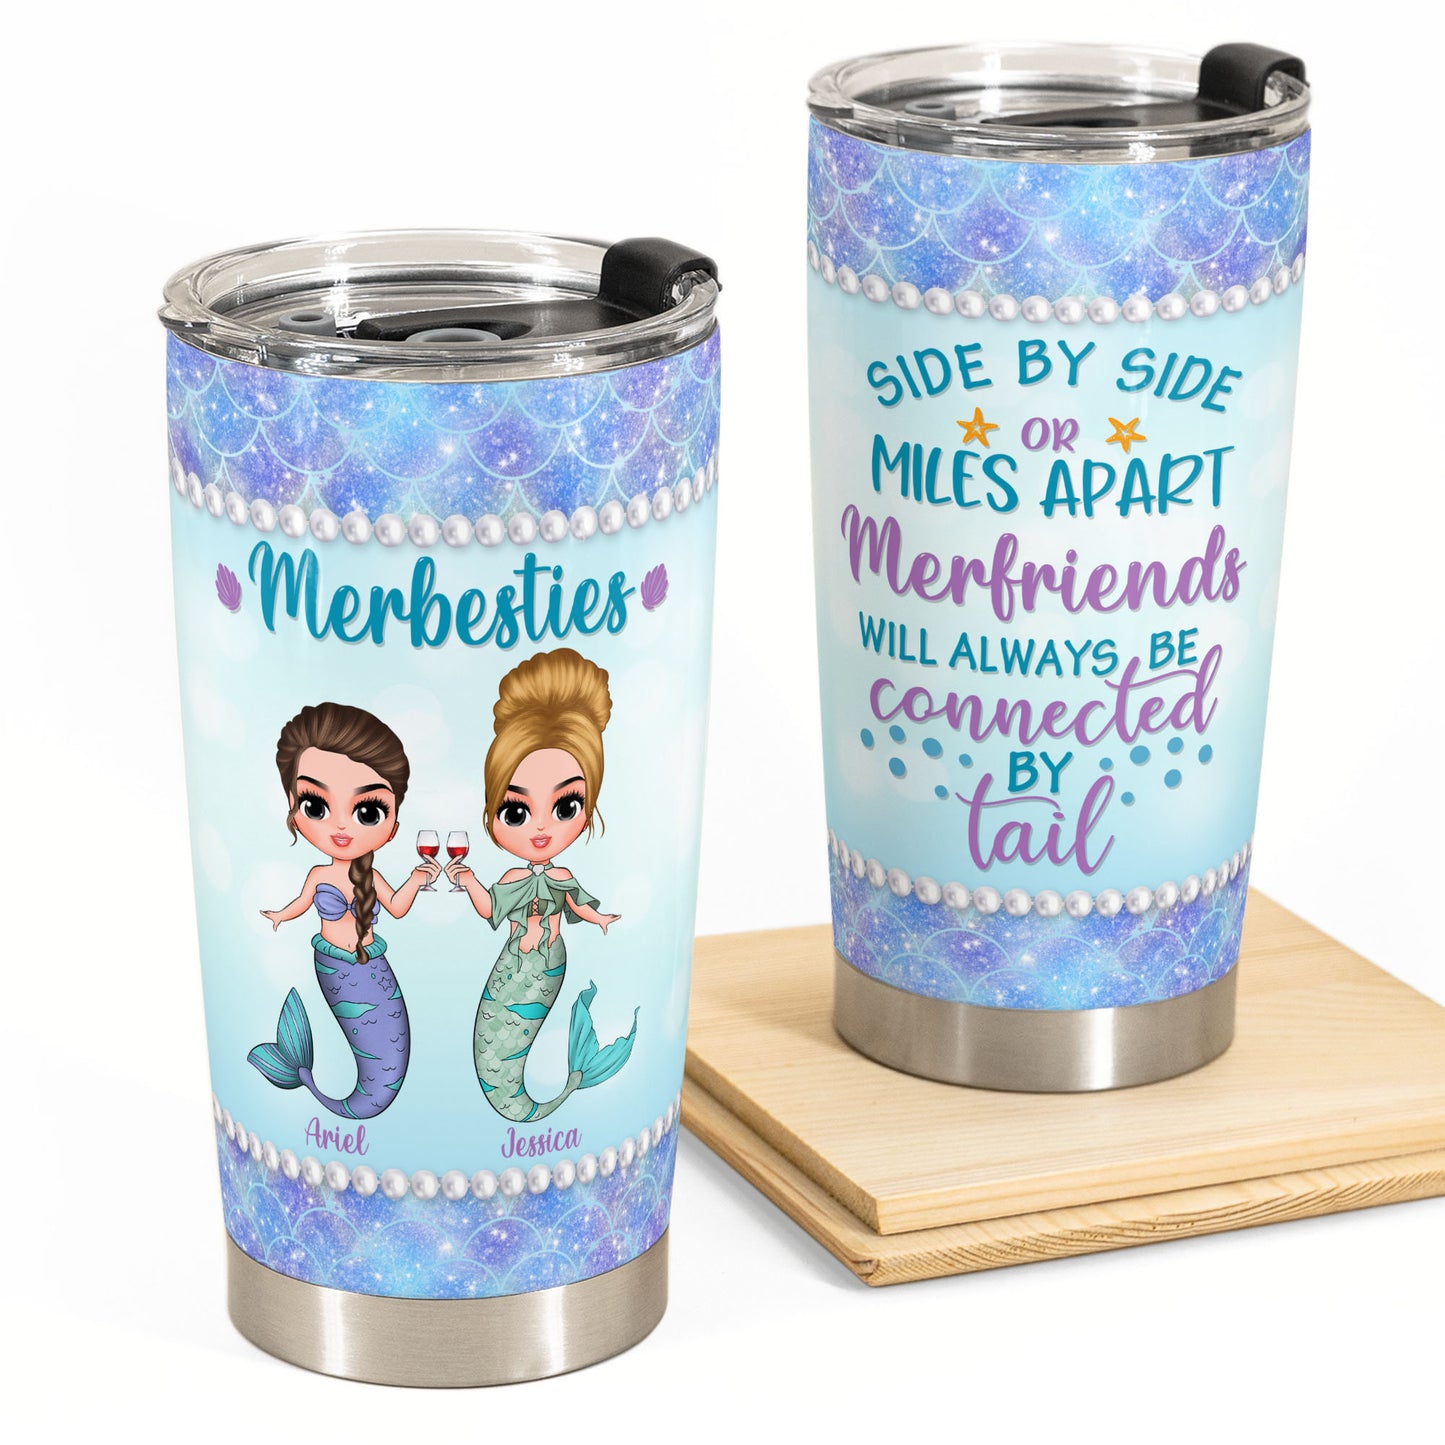 We'll Always Connected By Tail - Personalized Tumbler Cup - Birthday Gift For Merfriends, Mermaid Squad, Beach Lovers